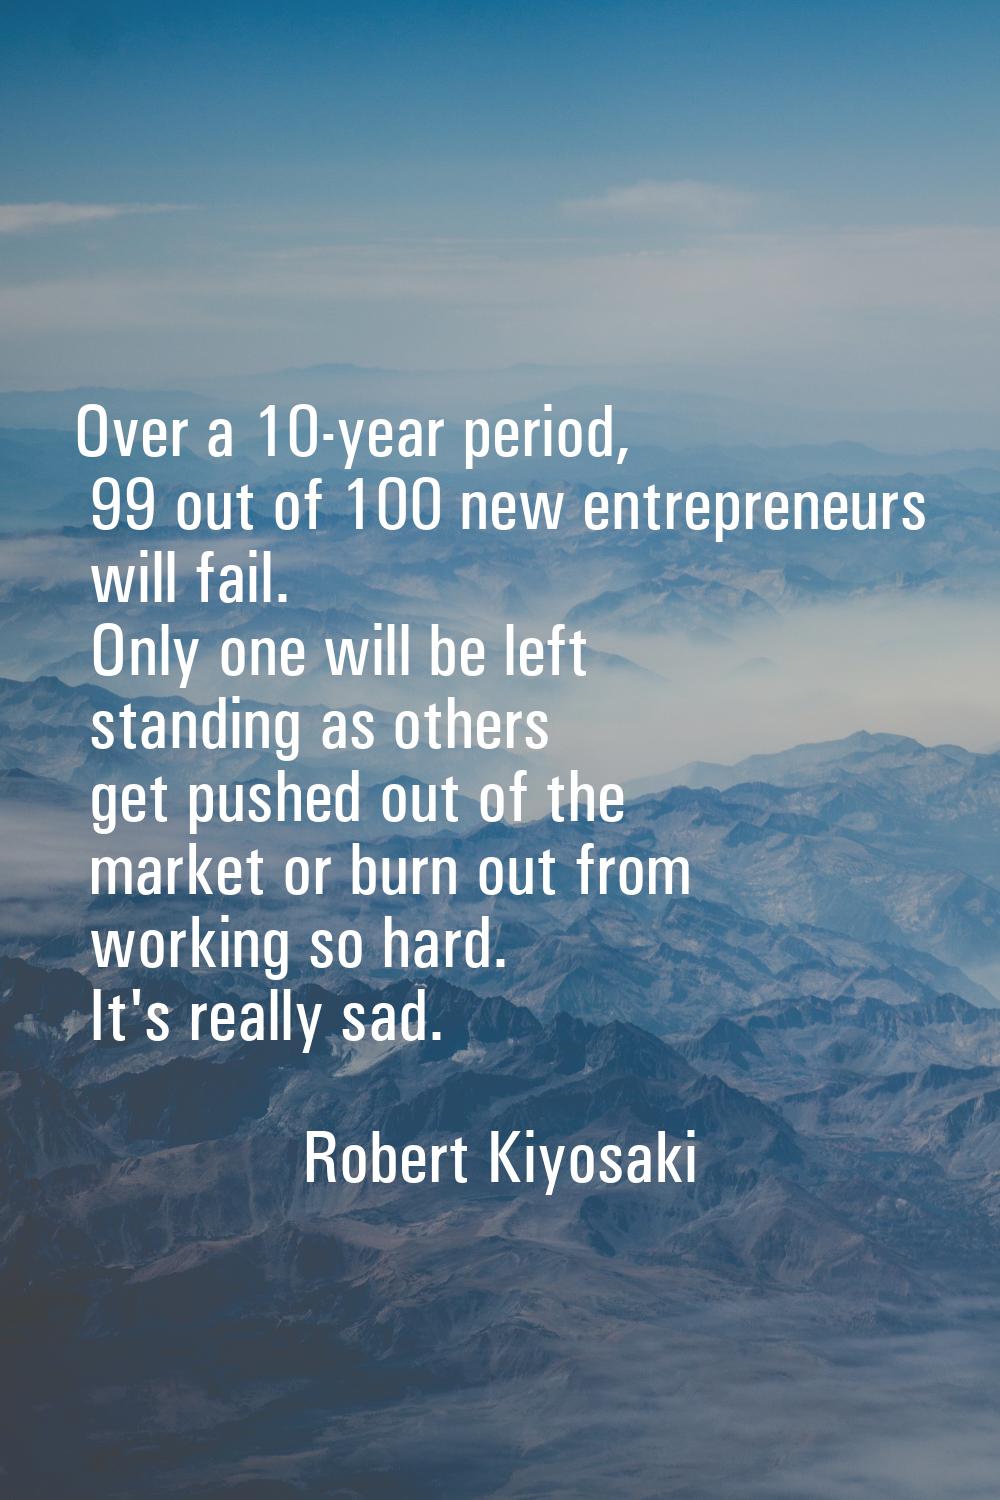 Over a 10-year period, 99 out of 100 new entrepreneurs will fail. Only one will be left standing as